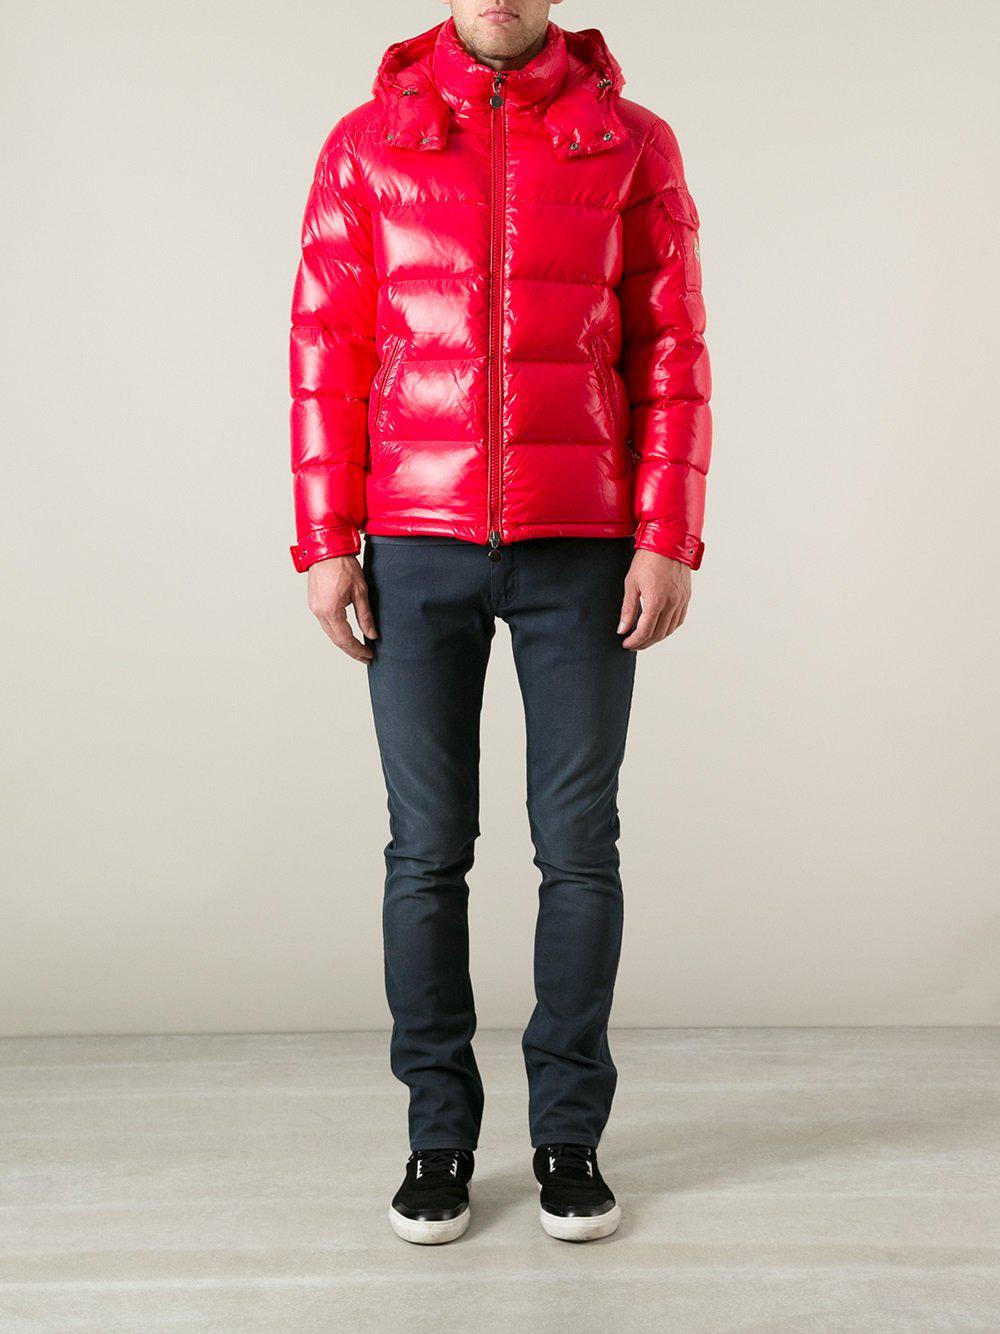 Moncler 'maya' Padded Jacket in Red for Men - Lyst